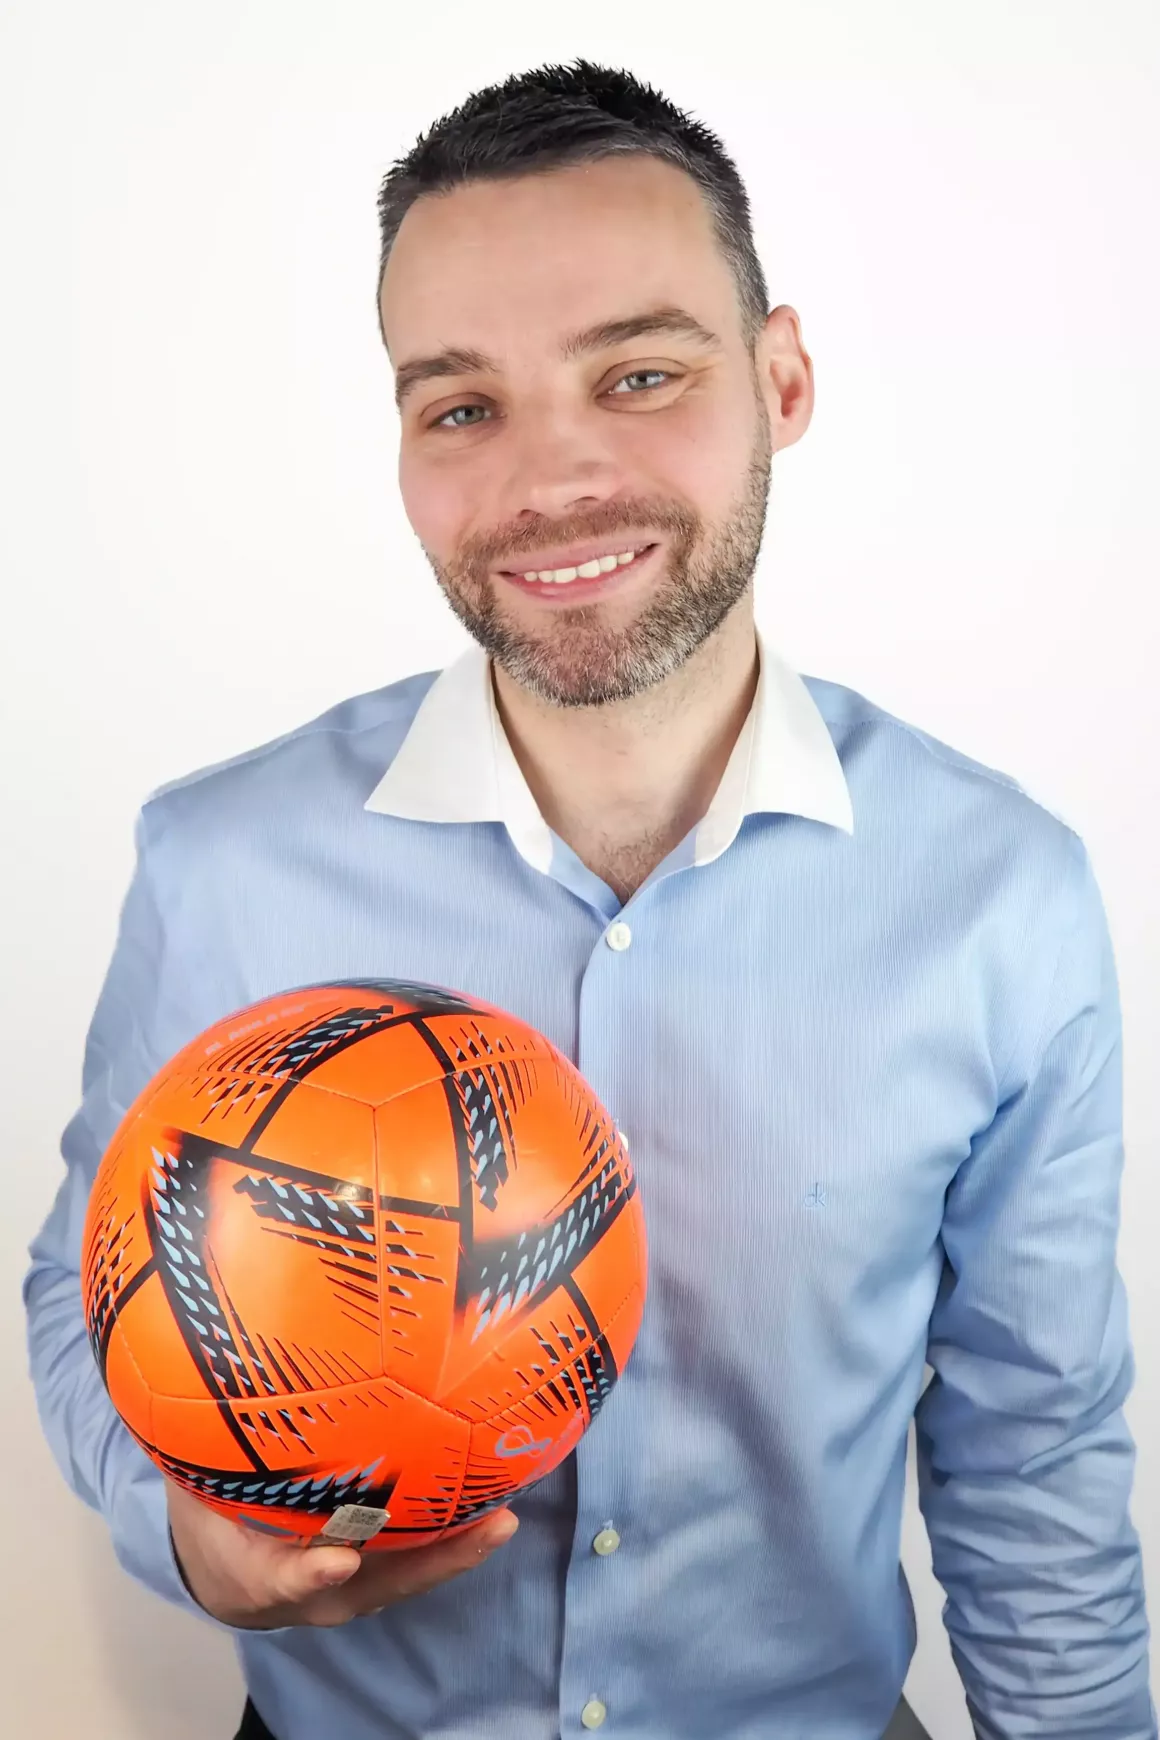 Mitchell Burne (Consultant) Wearing a blue shirt and holding a prop (orange football), photo taken with white background